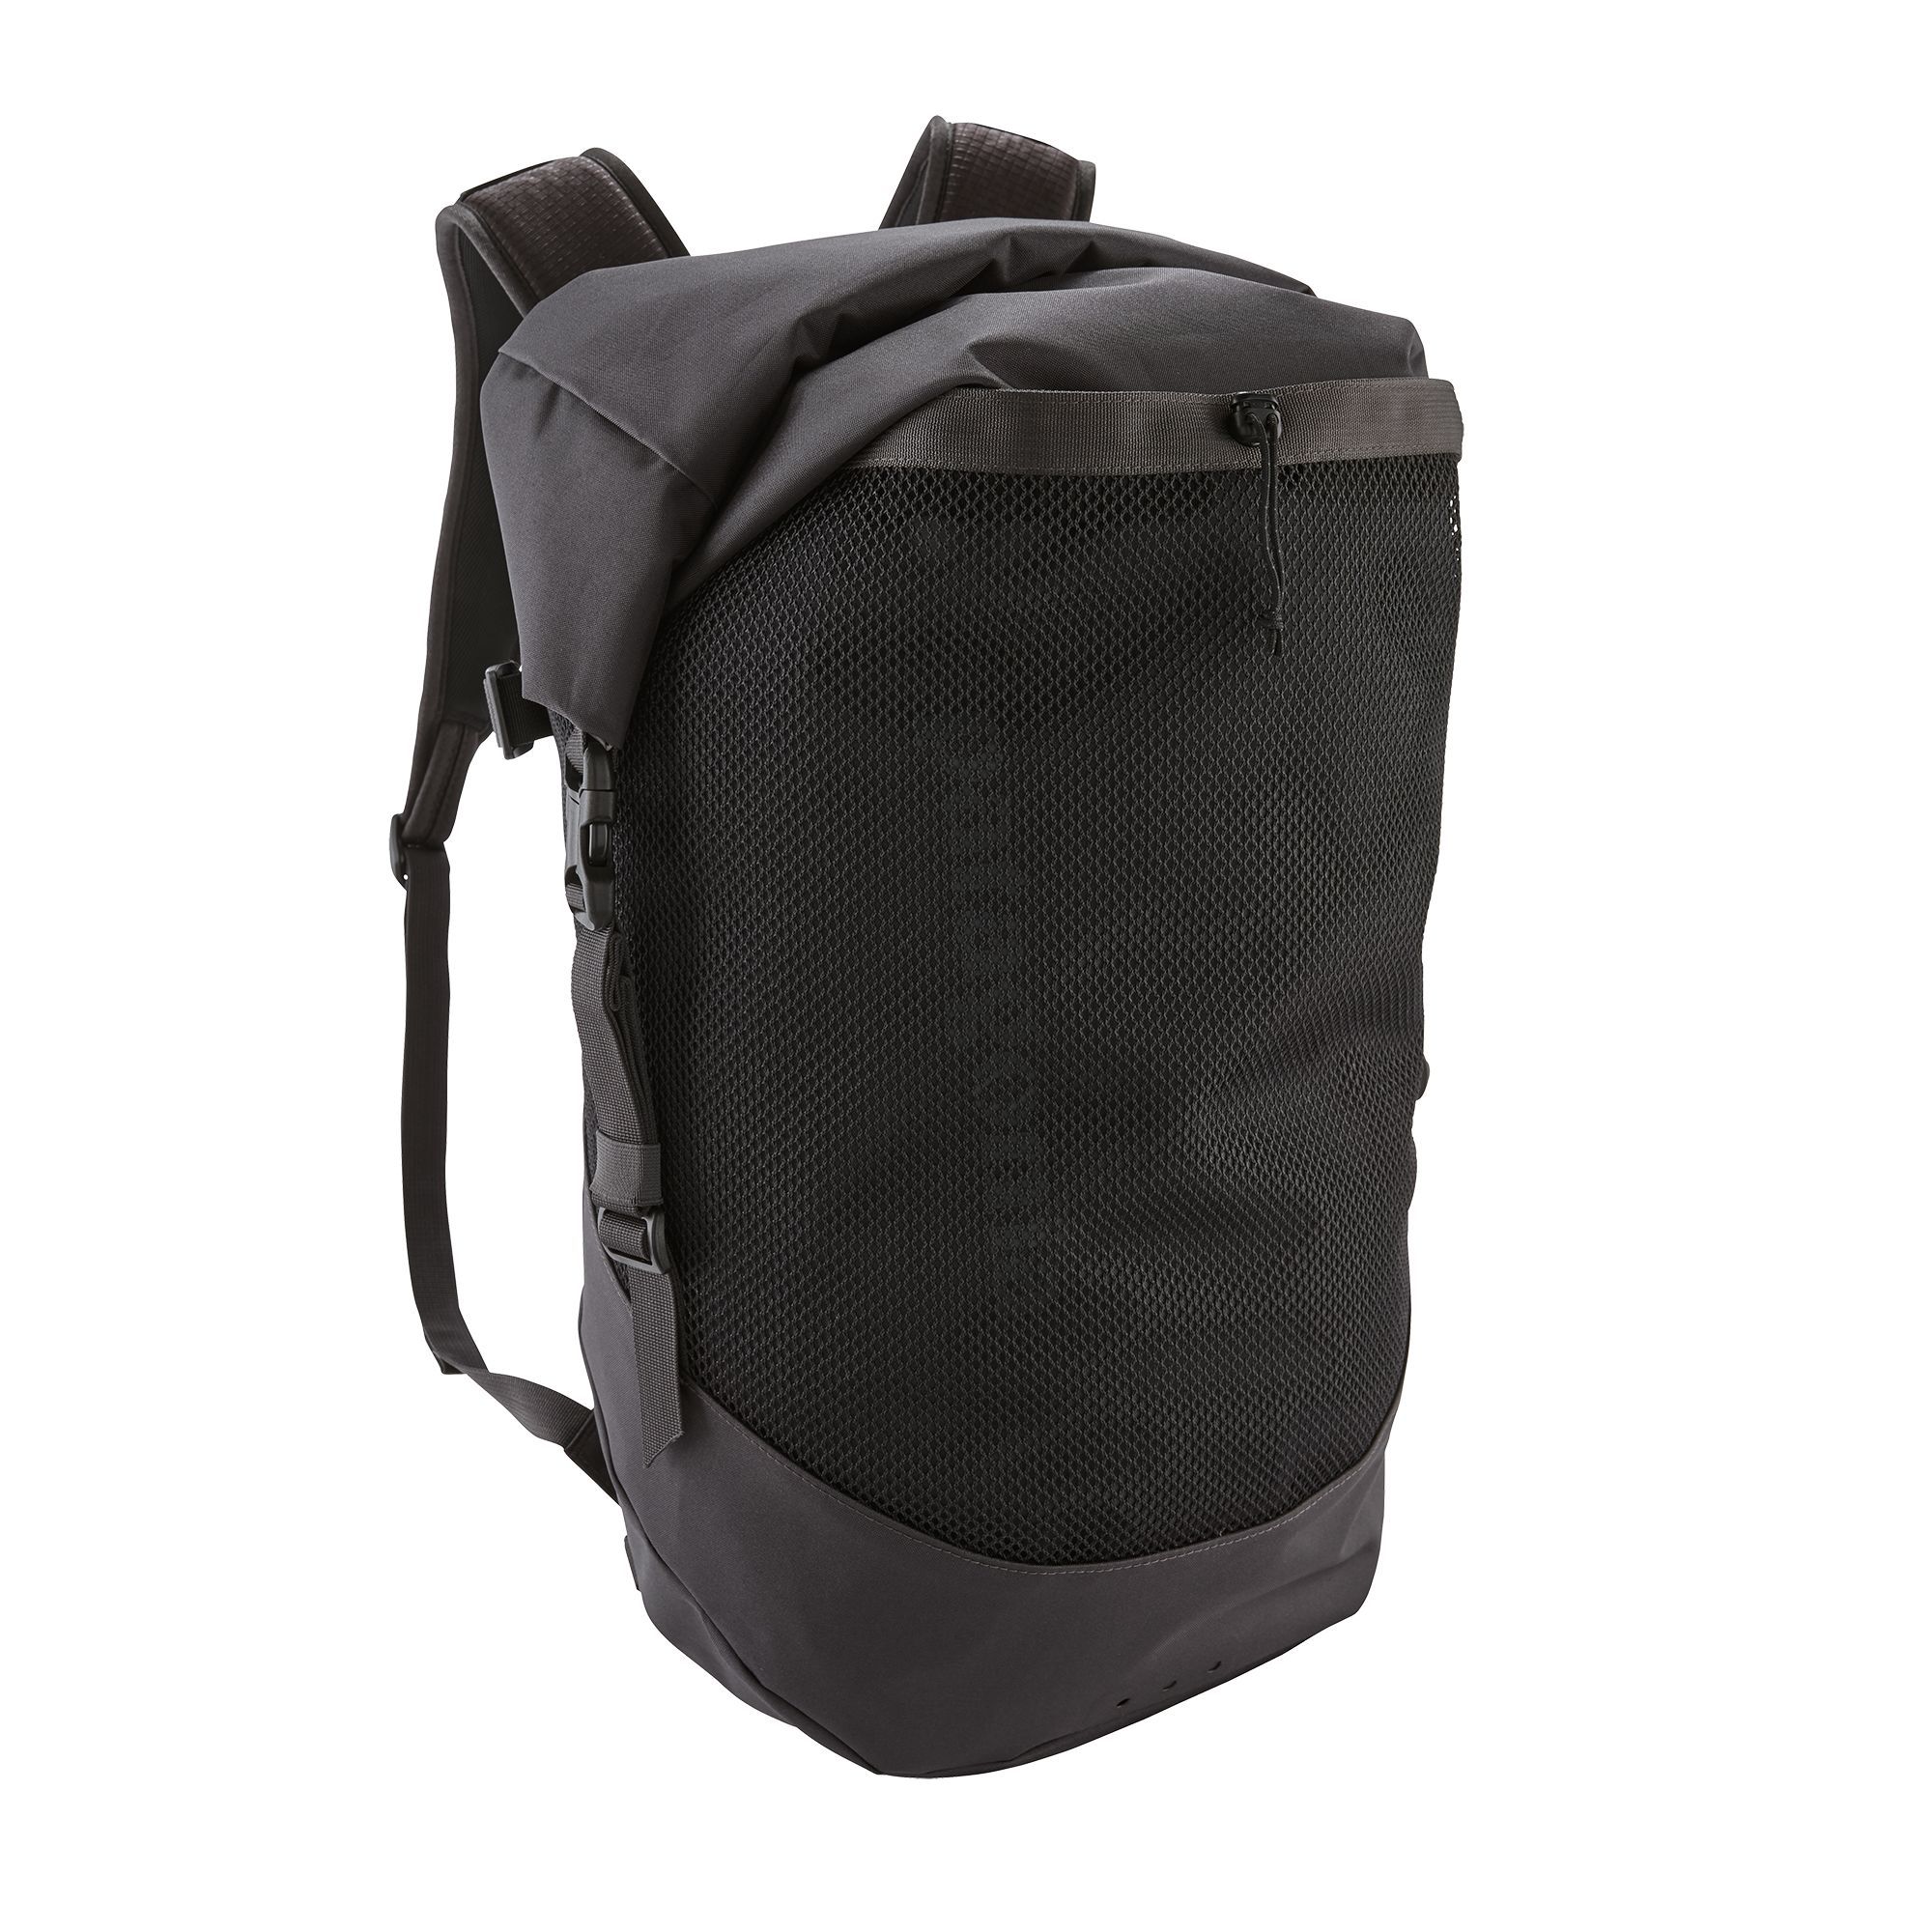 patagonia PATAGONIA Planning Roll-Top Backpack 35L